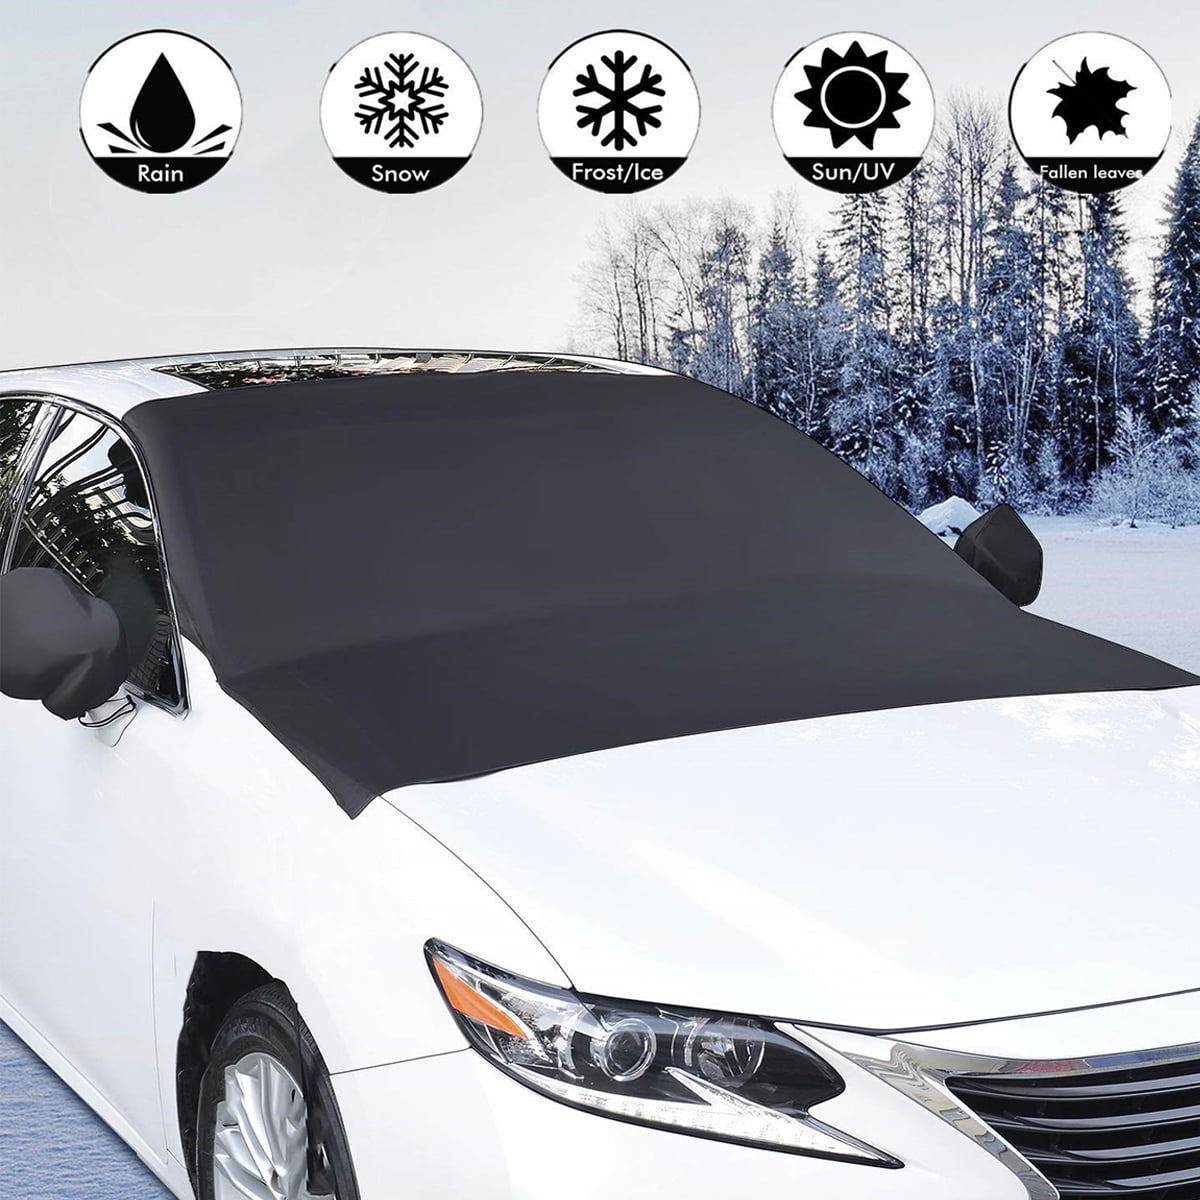 Car Windshield Snow Cover Sun Shade Winter Ice Dust Frost Guard Protector 80*47"